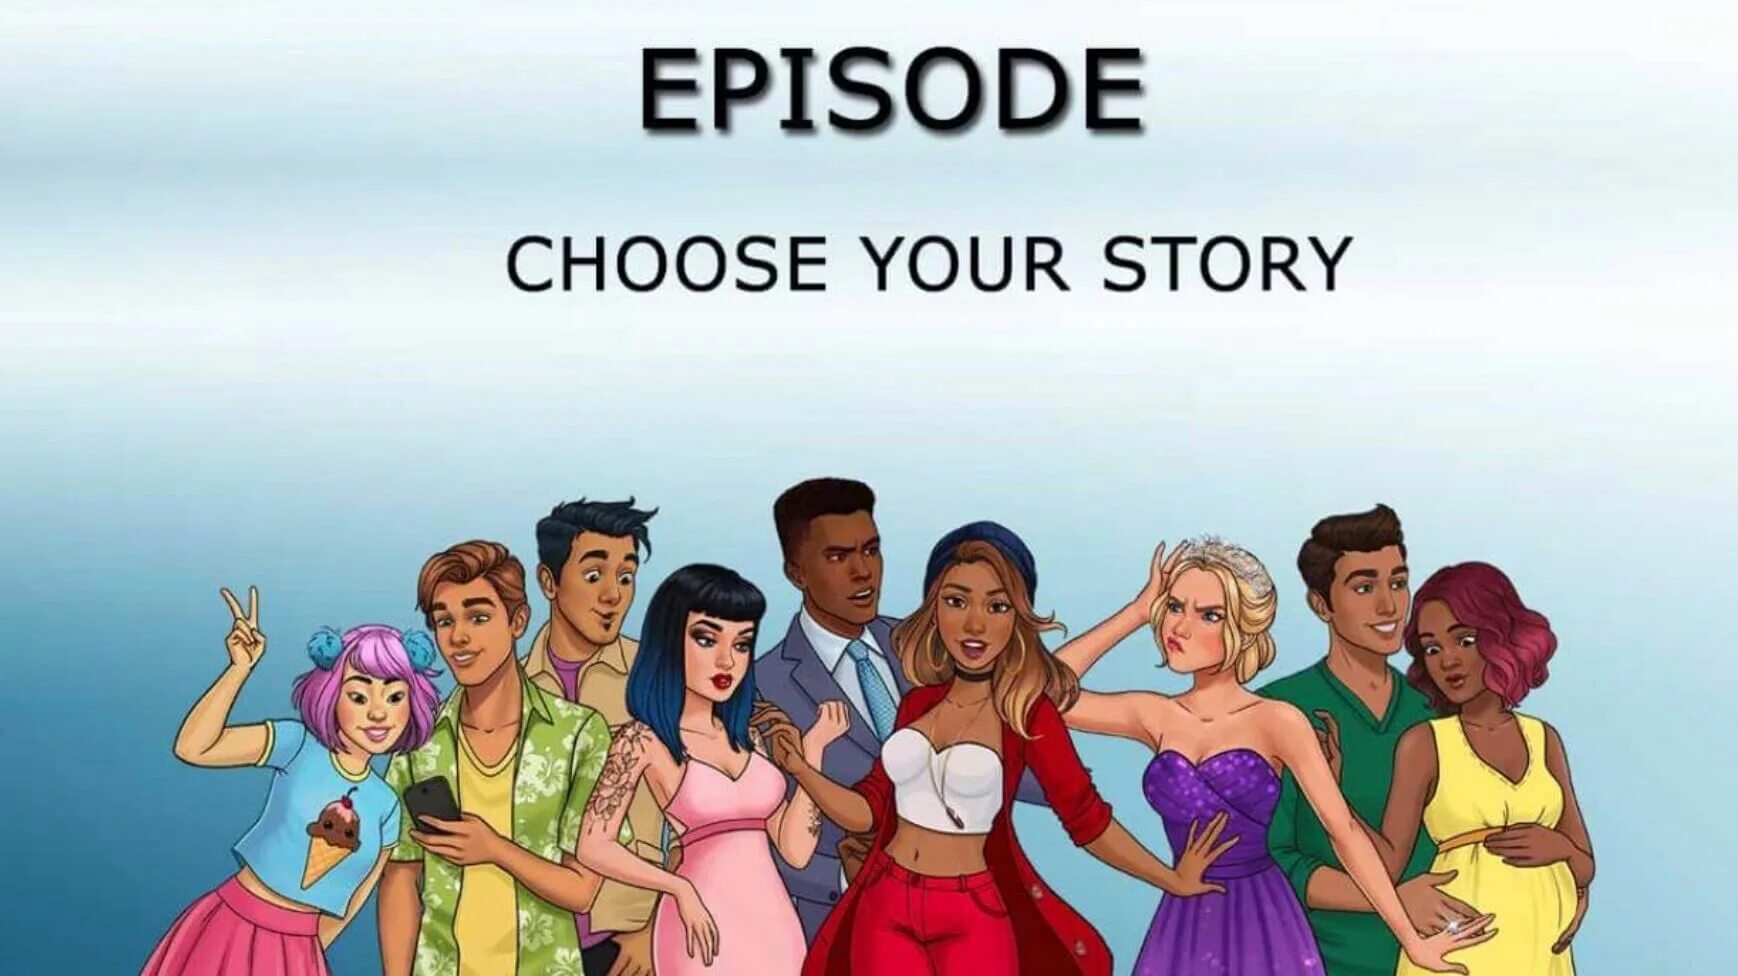 Choose your first. Episode игра. Игра Episode choose your story. Choose your story история. Episode мод.